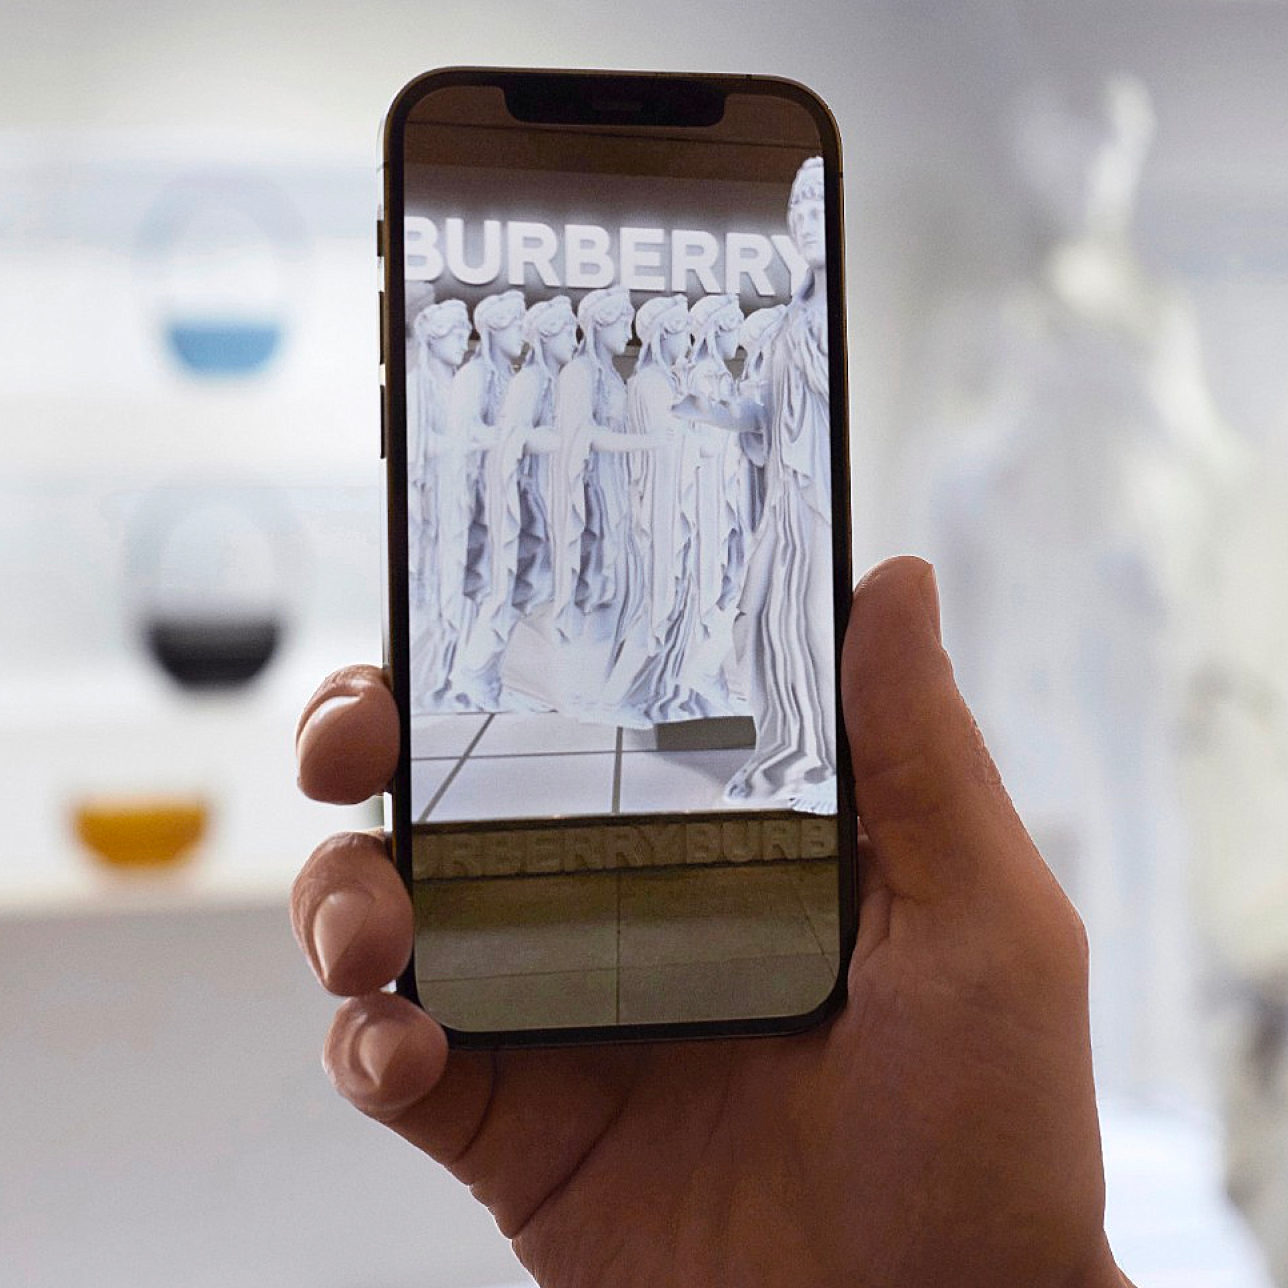 How AR improves the online experience for luxury retailers